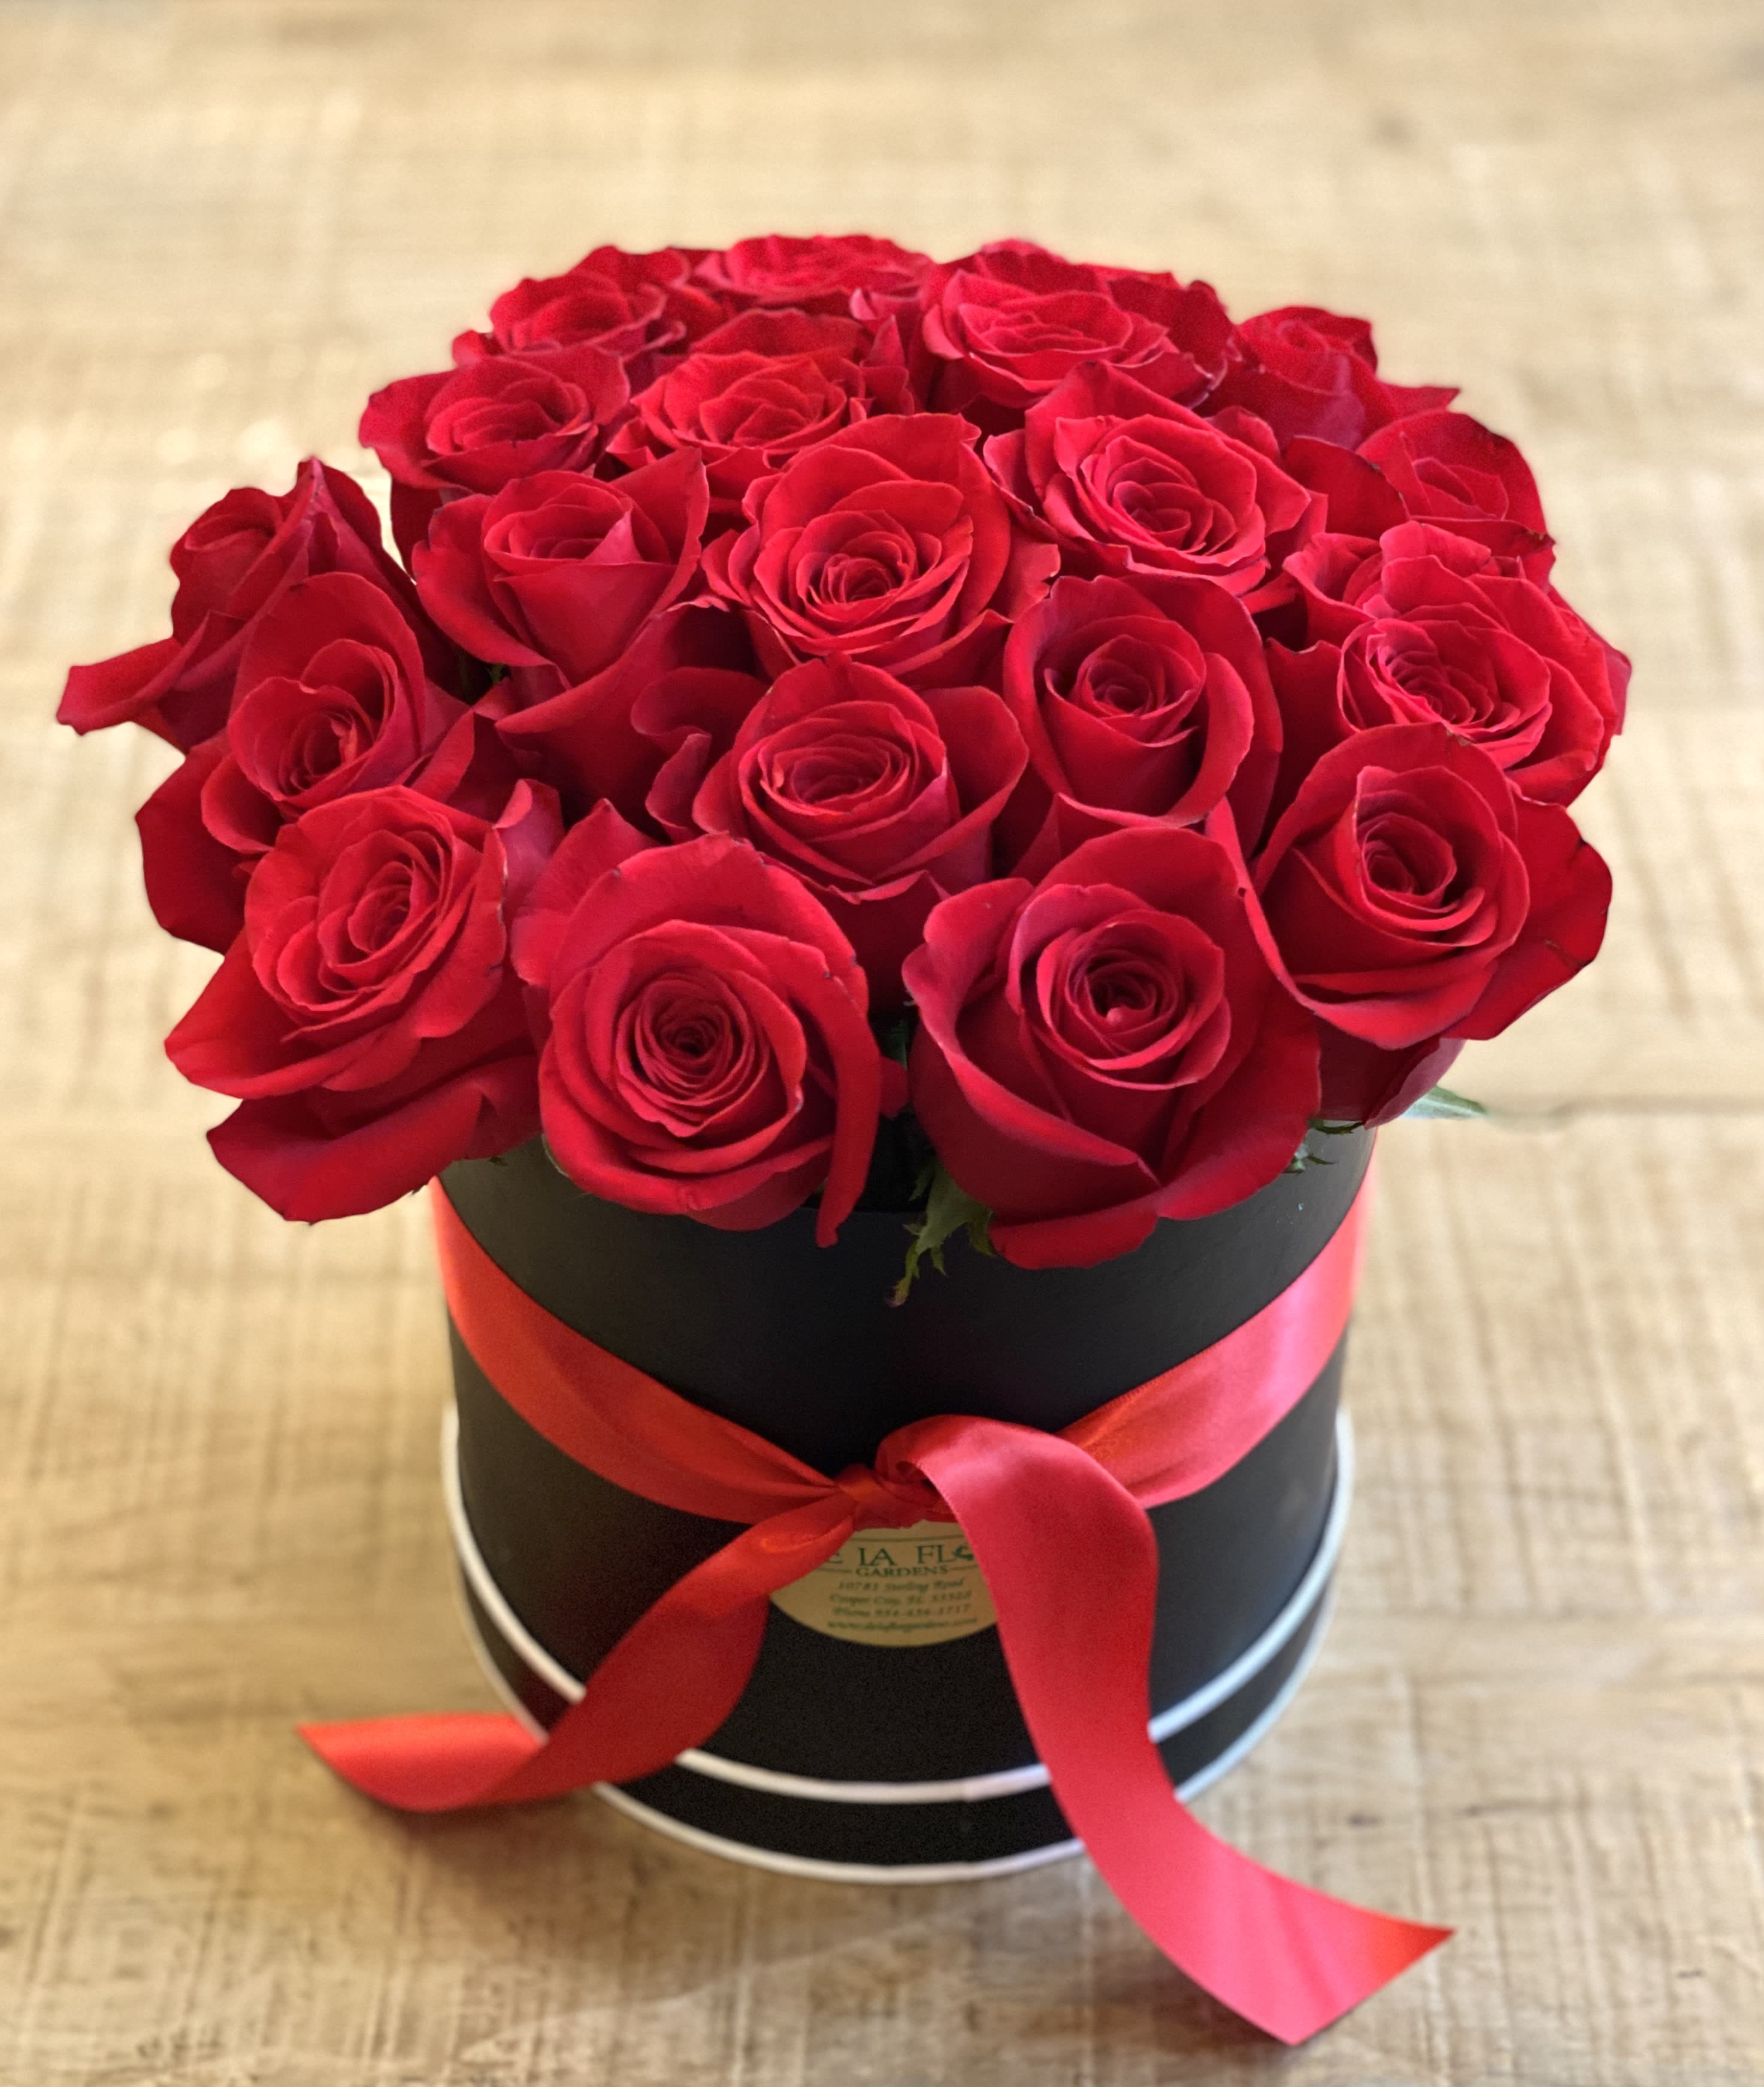 Deluxe Red Rose Hatbox - 20 Premium Red Roses in a classy hatbox!  What could be better? Available for pickup or local delivery only.